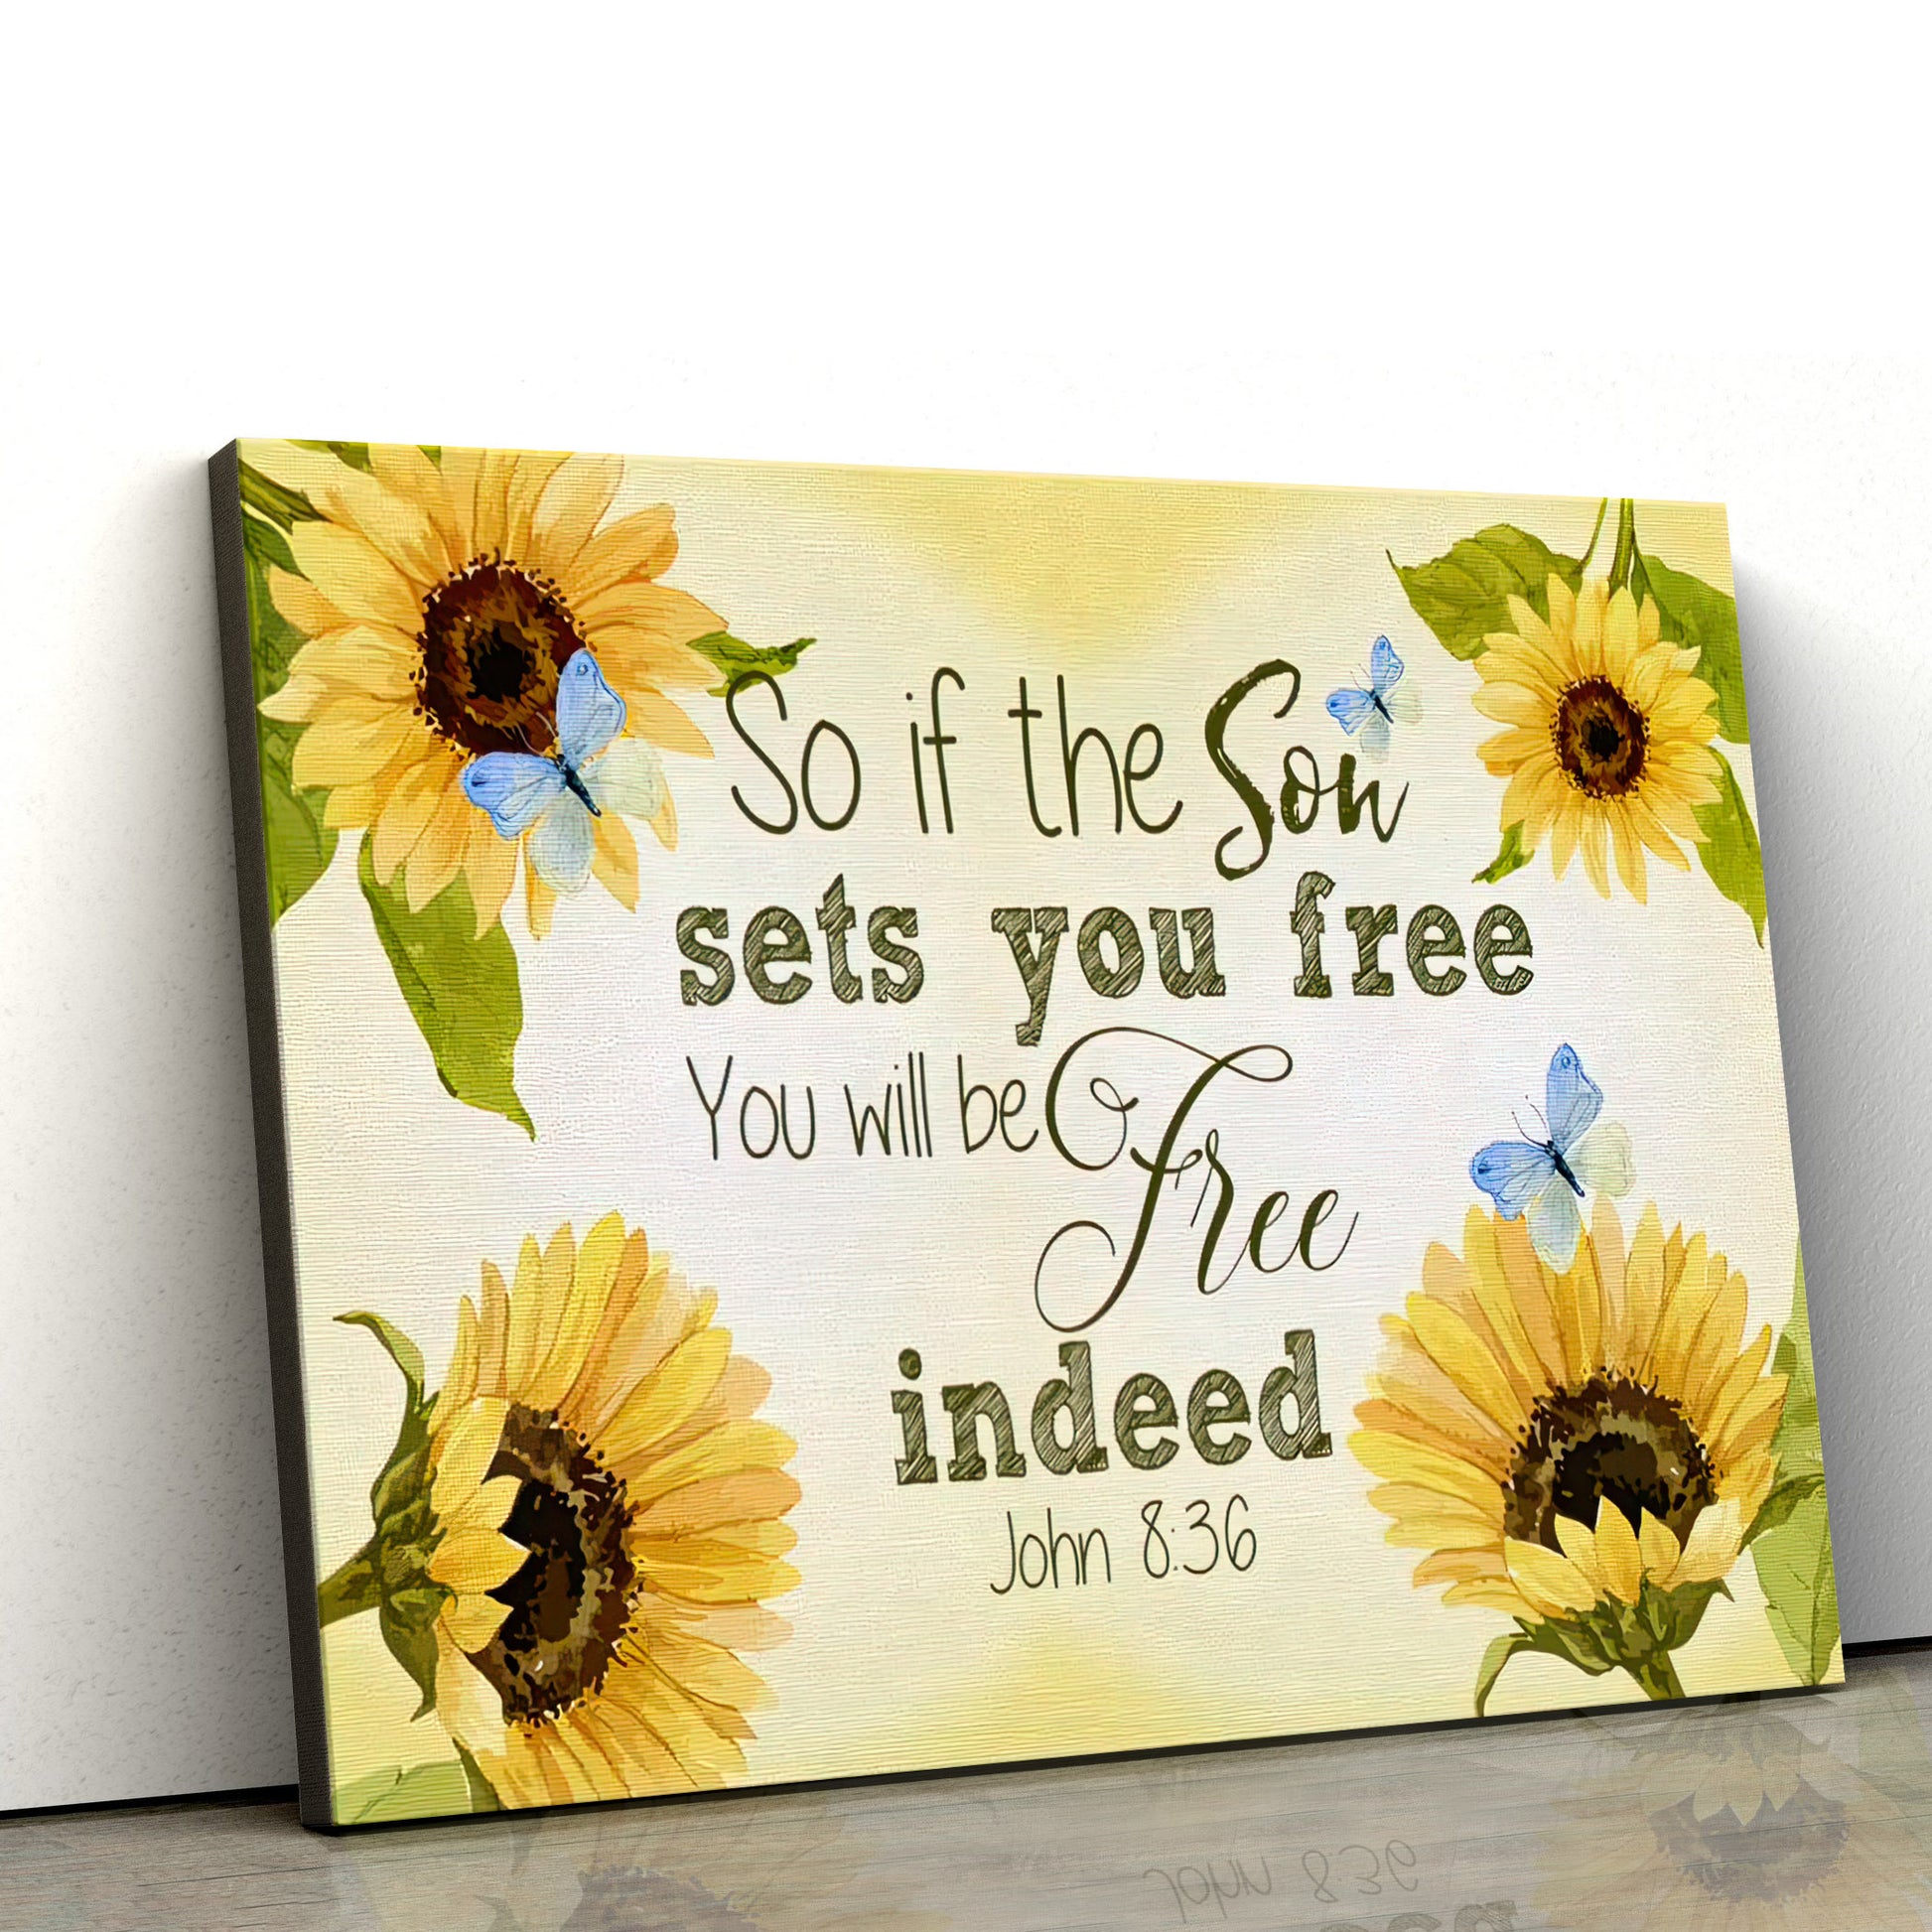 John 836 So If The Son Sets You Free Will Be Indeed Canvas Wall Art